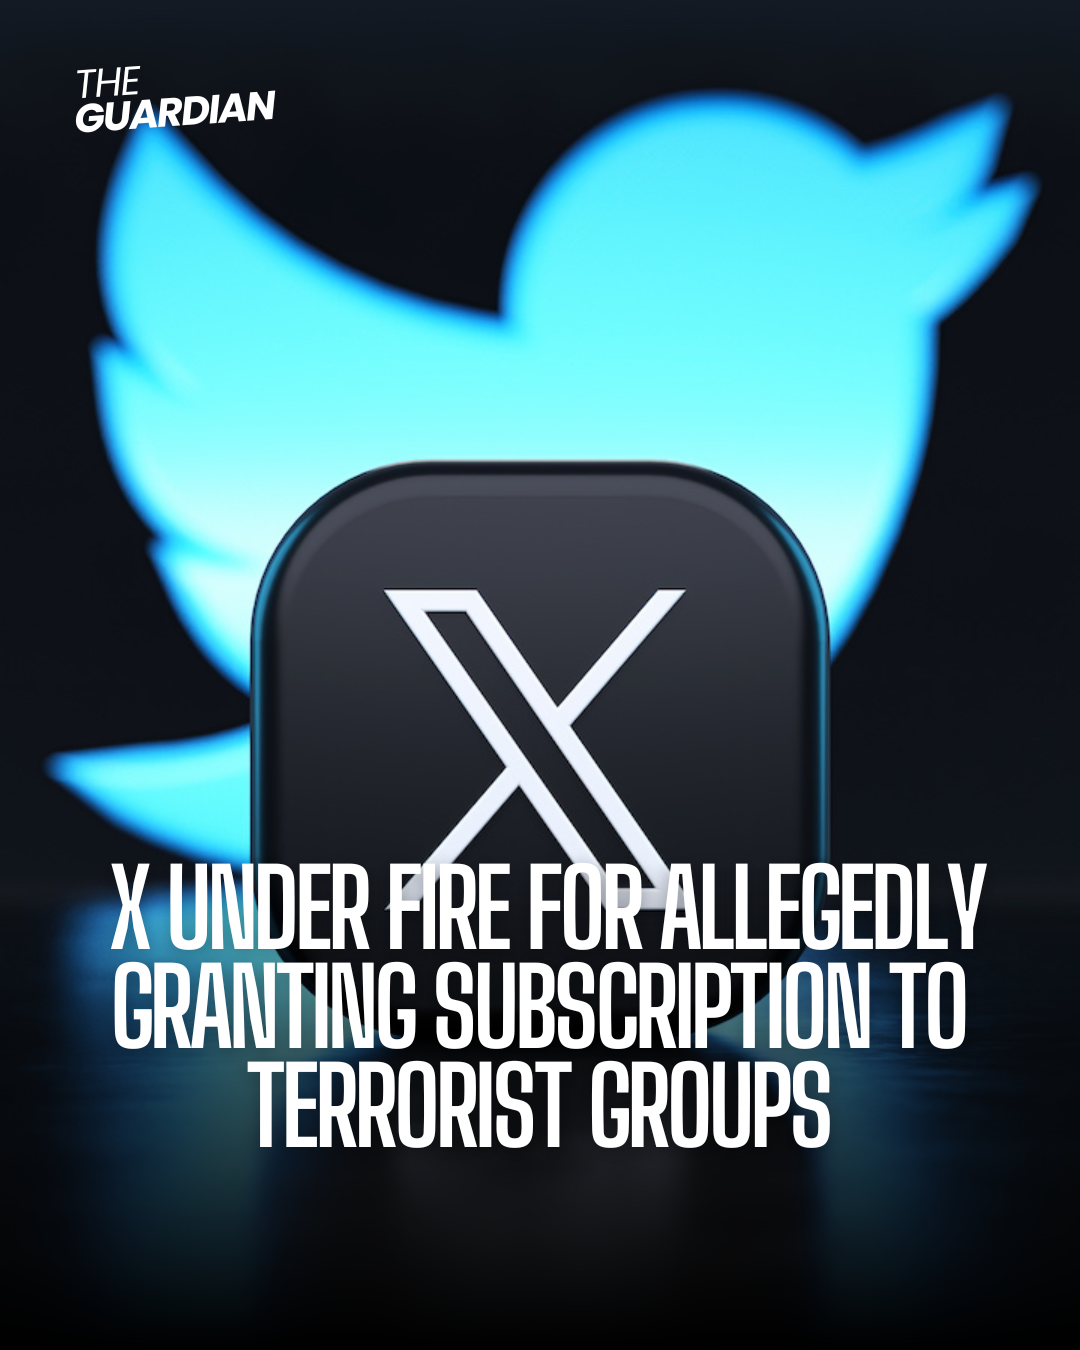 Platform X is under fire after claims arose that it gave subscription privileges to blacklisted terrorist groups.